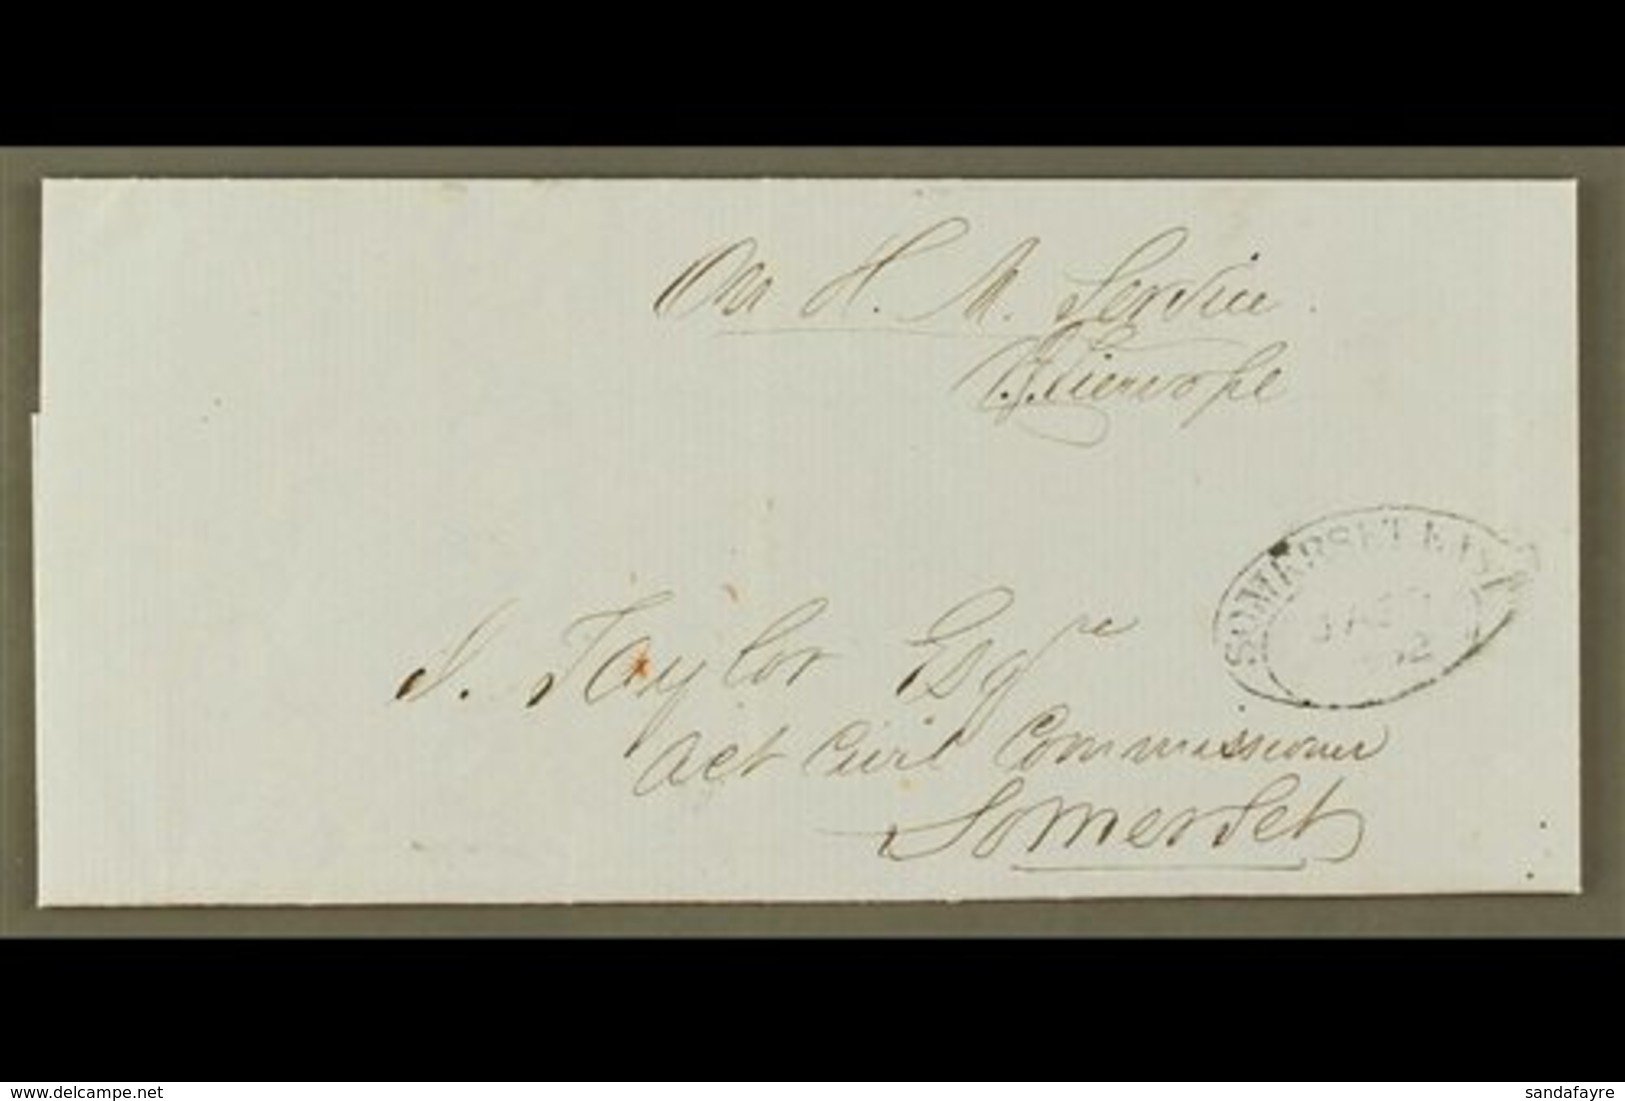 CAPE 1862 (29 Jan) Cover From Pearston To Somerset East, With Dated Oval Handstamp In Red On Reverse, Oval Arrival Mark, - Unclassified